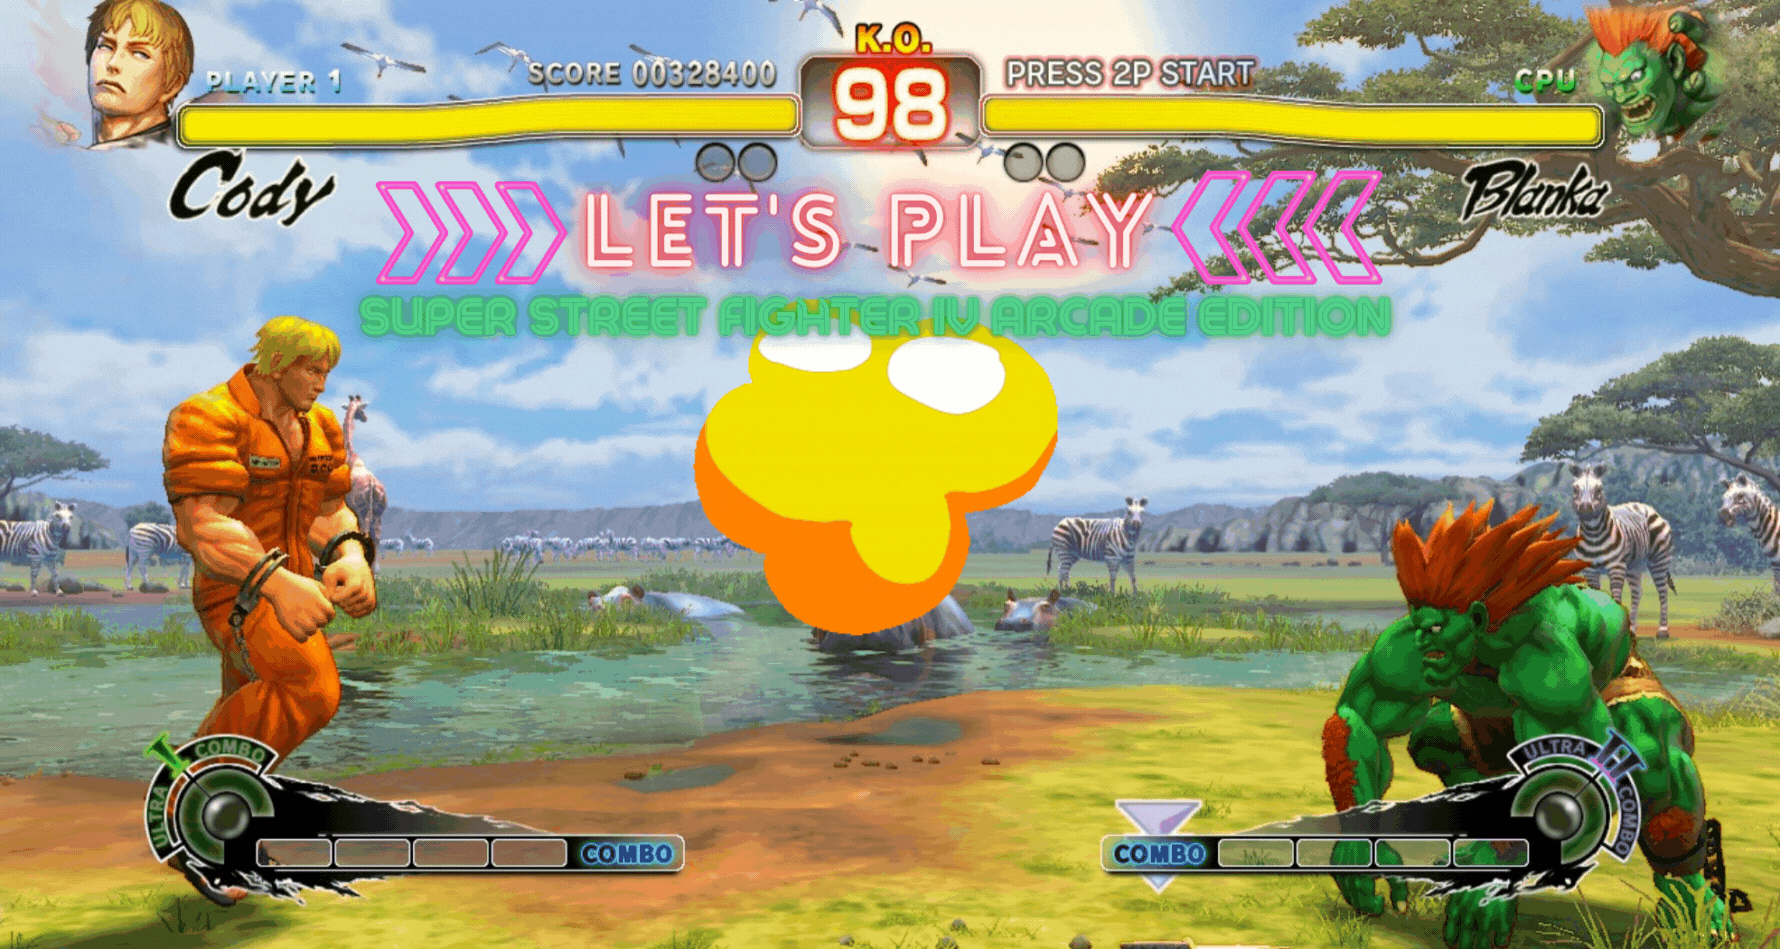 Let's Play #1 Super Street Fighter IV Arcade Edition.gif